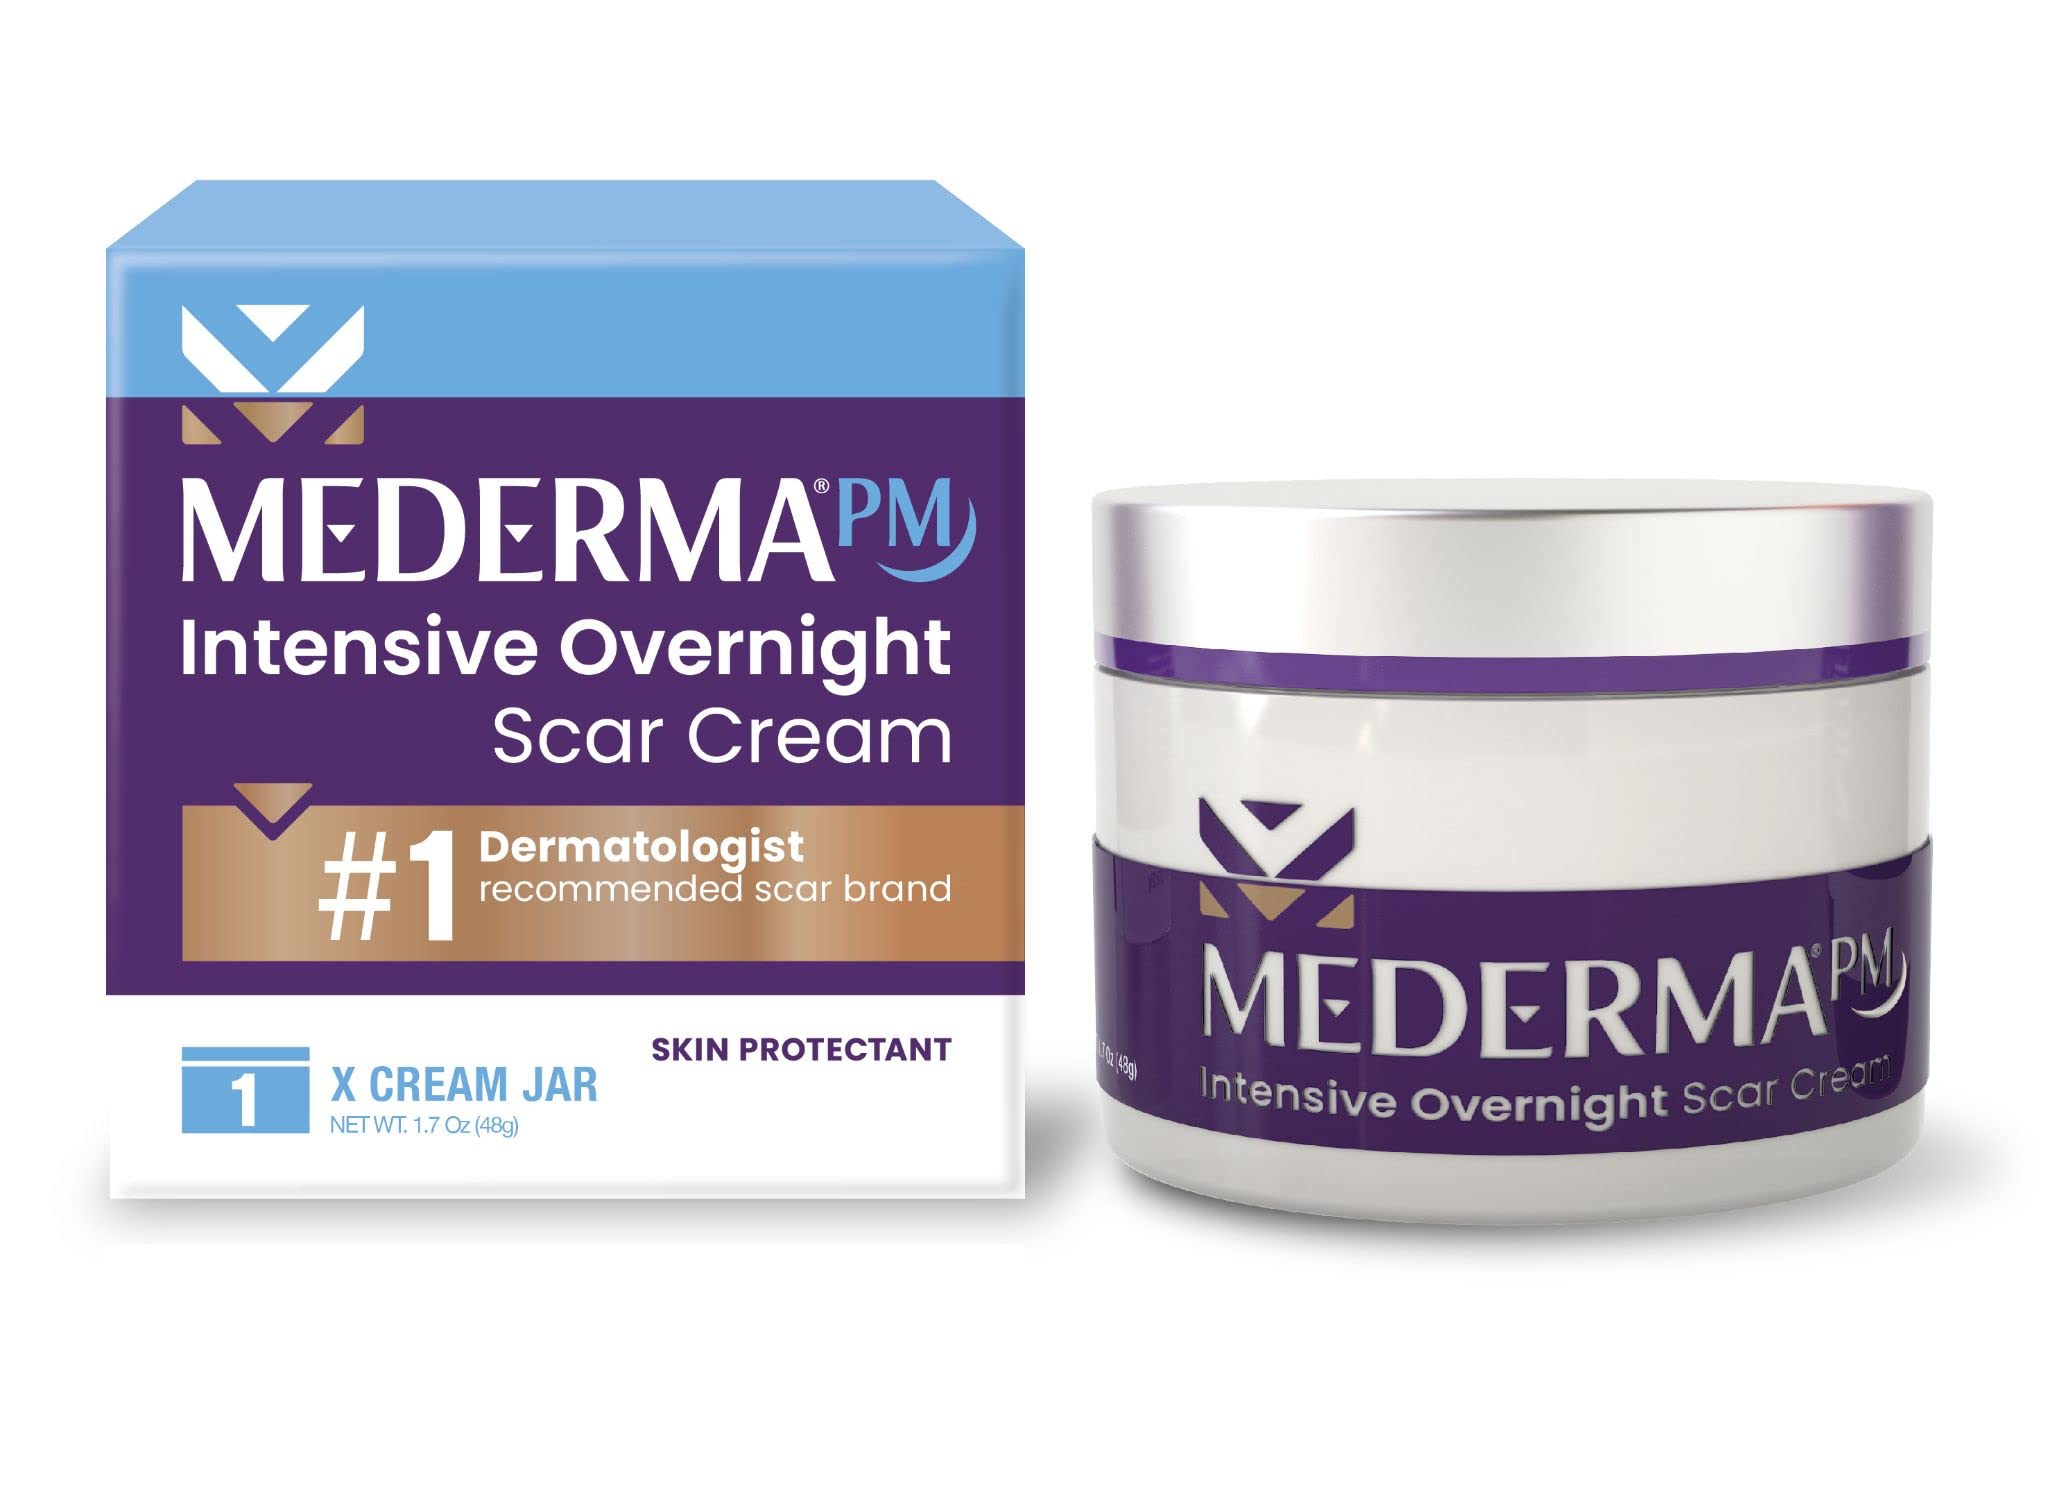 Mederma PM Intensive Overnight Scar Cream, Works with Skin's Nighttime Regenerative Activity & Advanced Scar Gel, Treats Old and New Scars, Reduces the Appearance of Scars from Acne